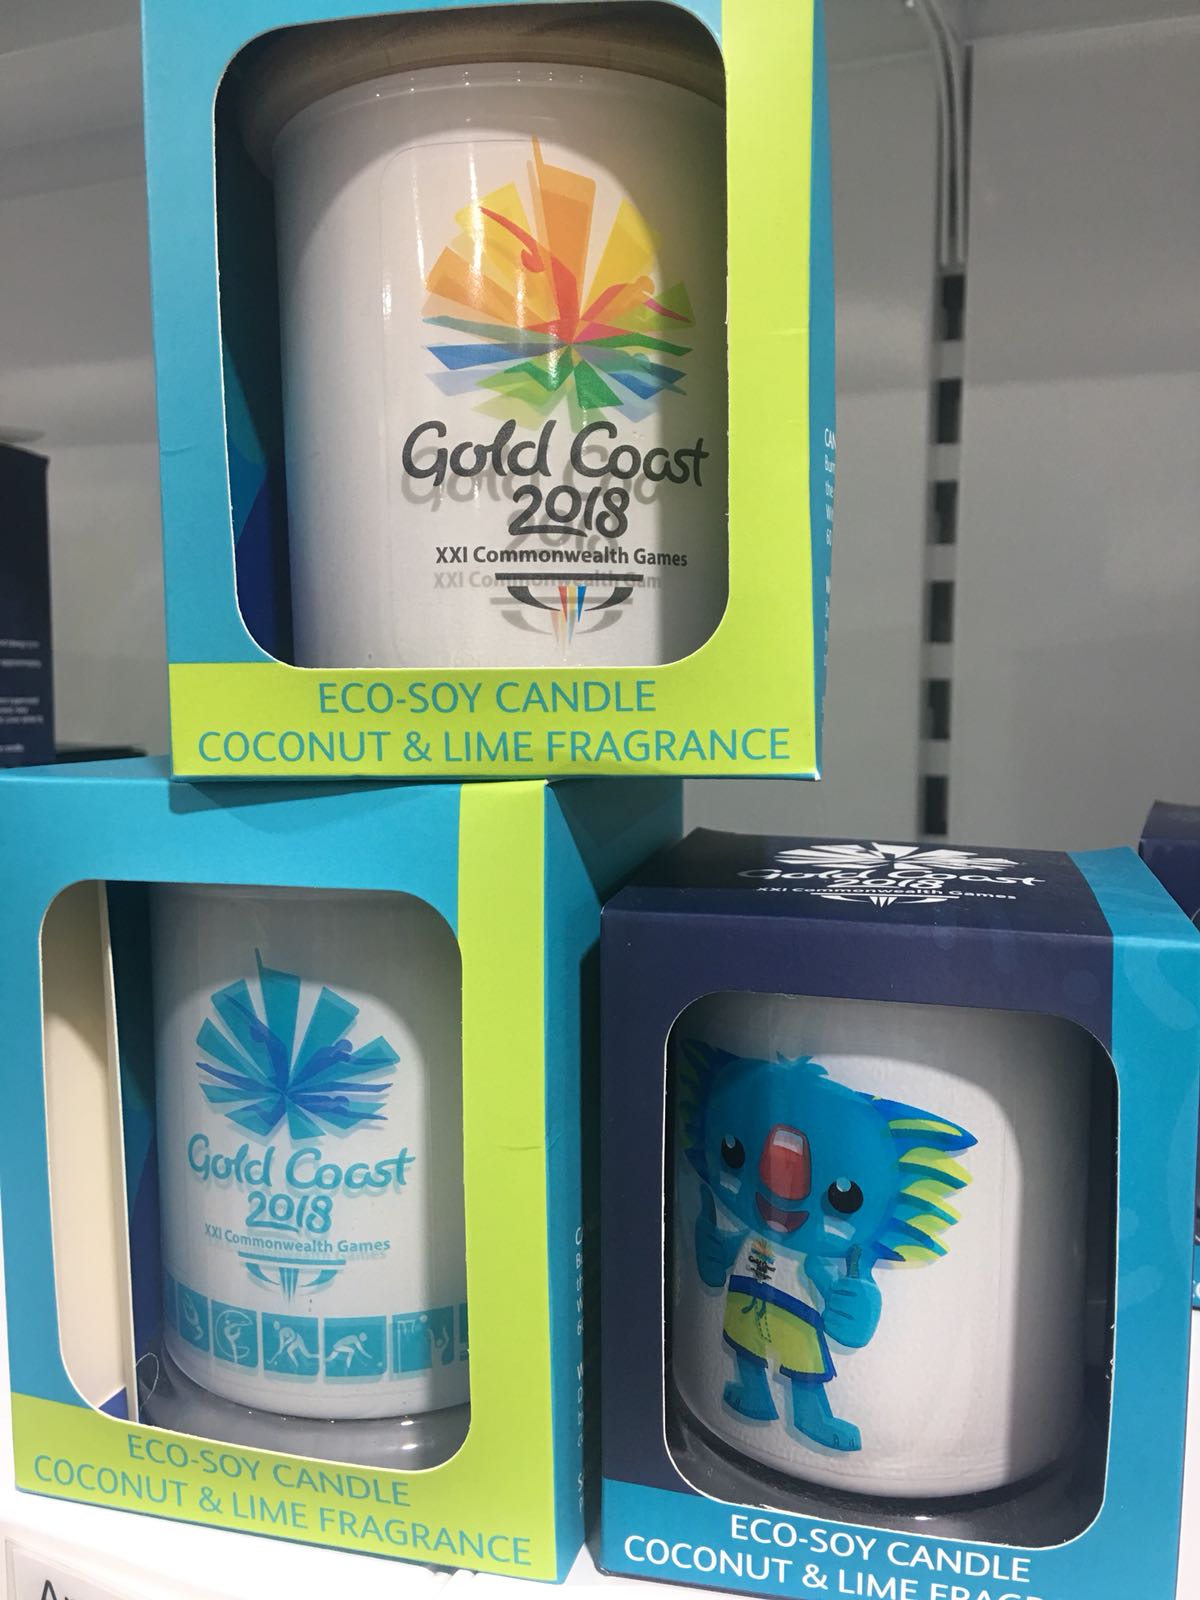  Eco-Soy candle, being sold at the Commonwealth Games 2018. 